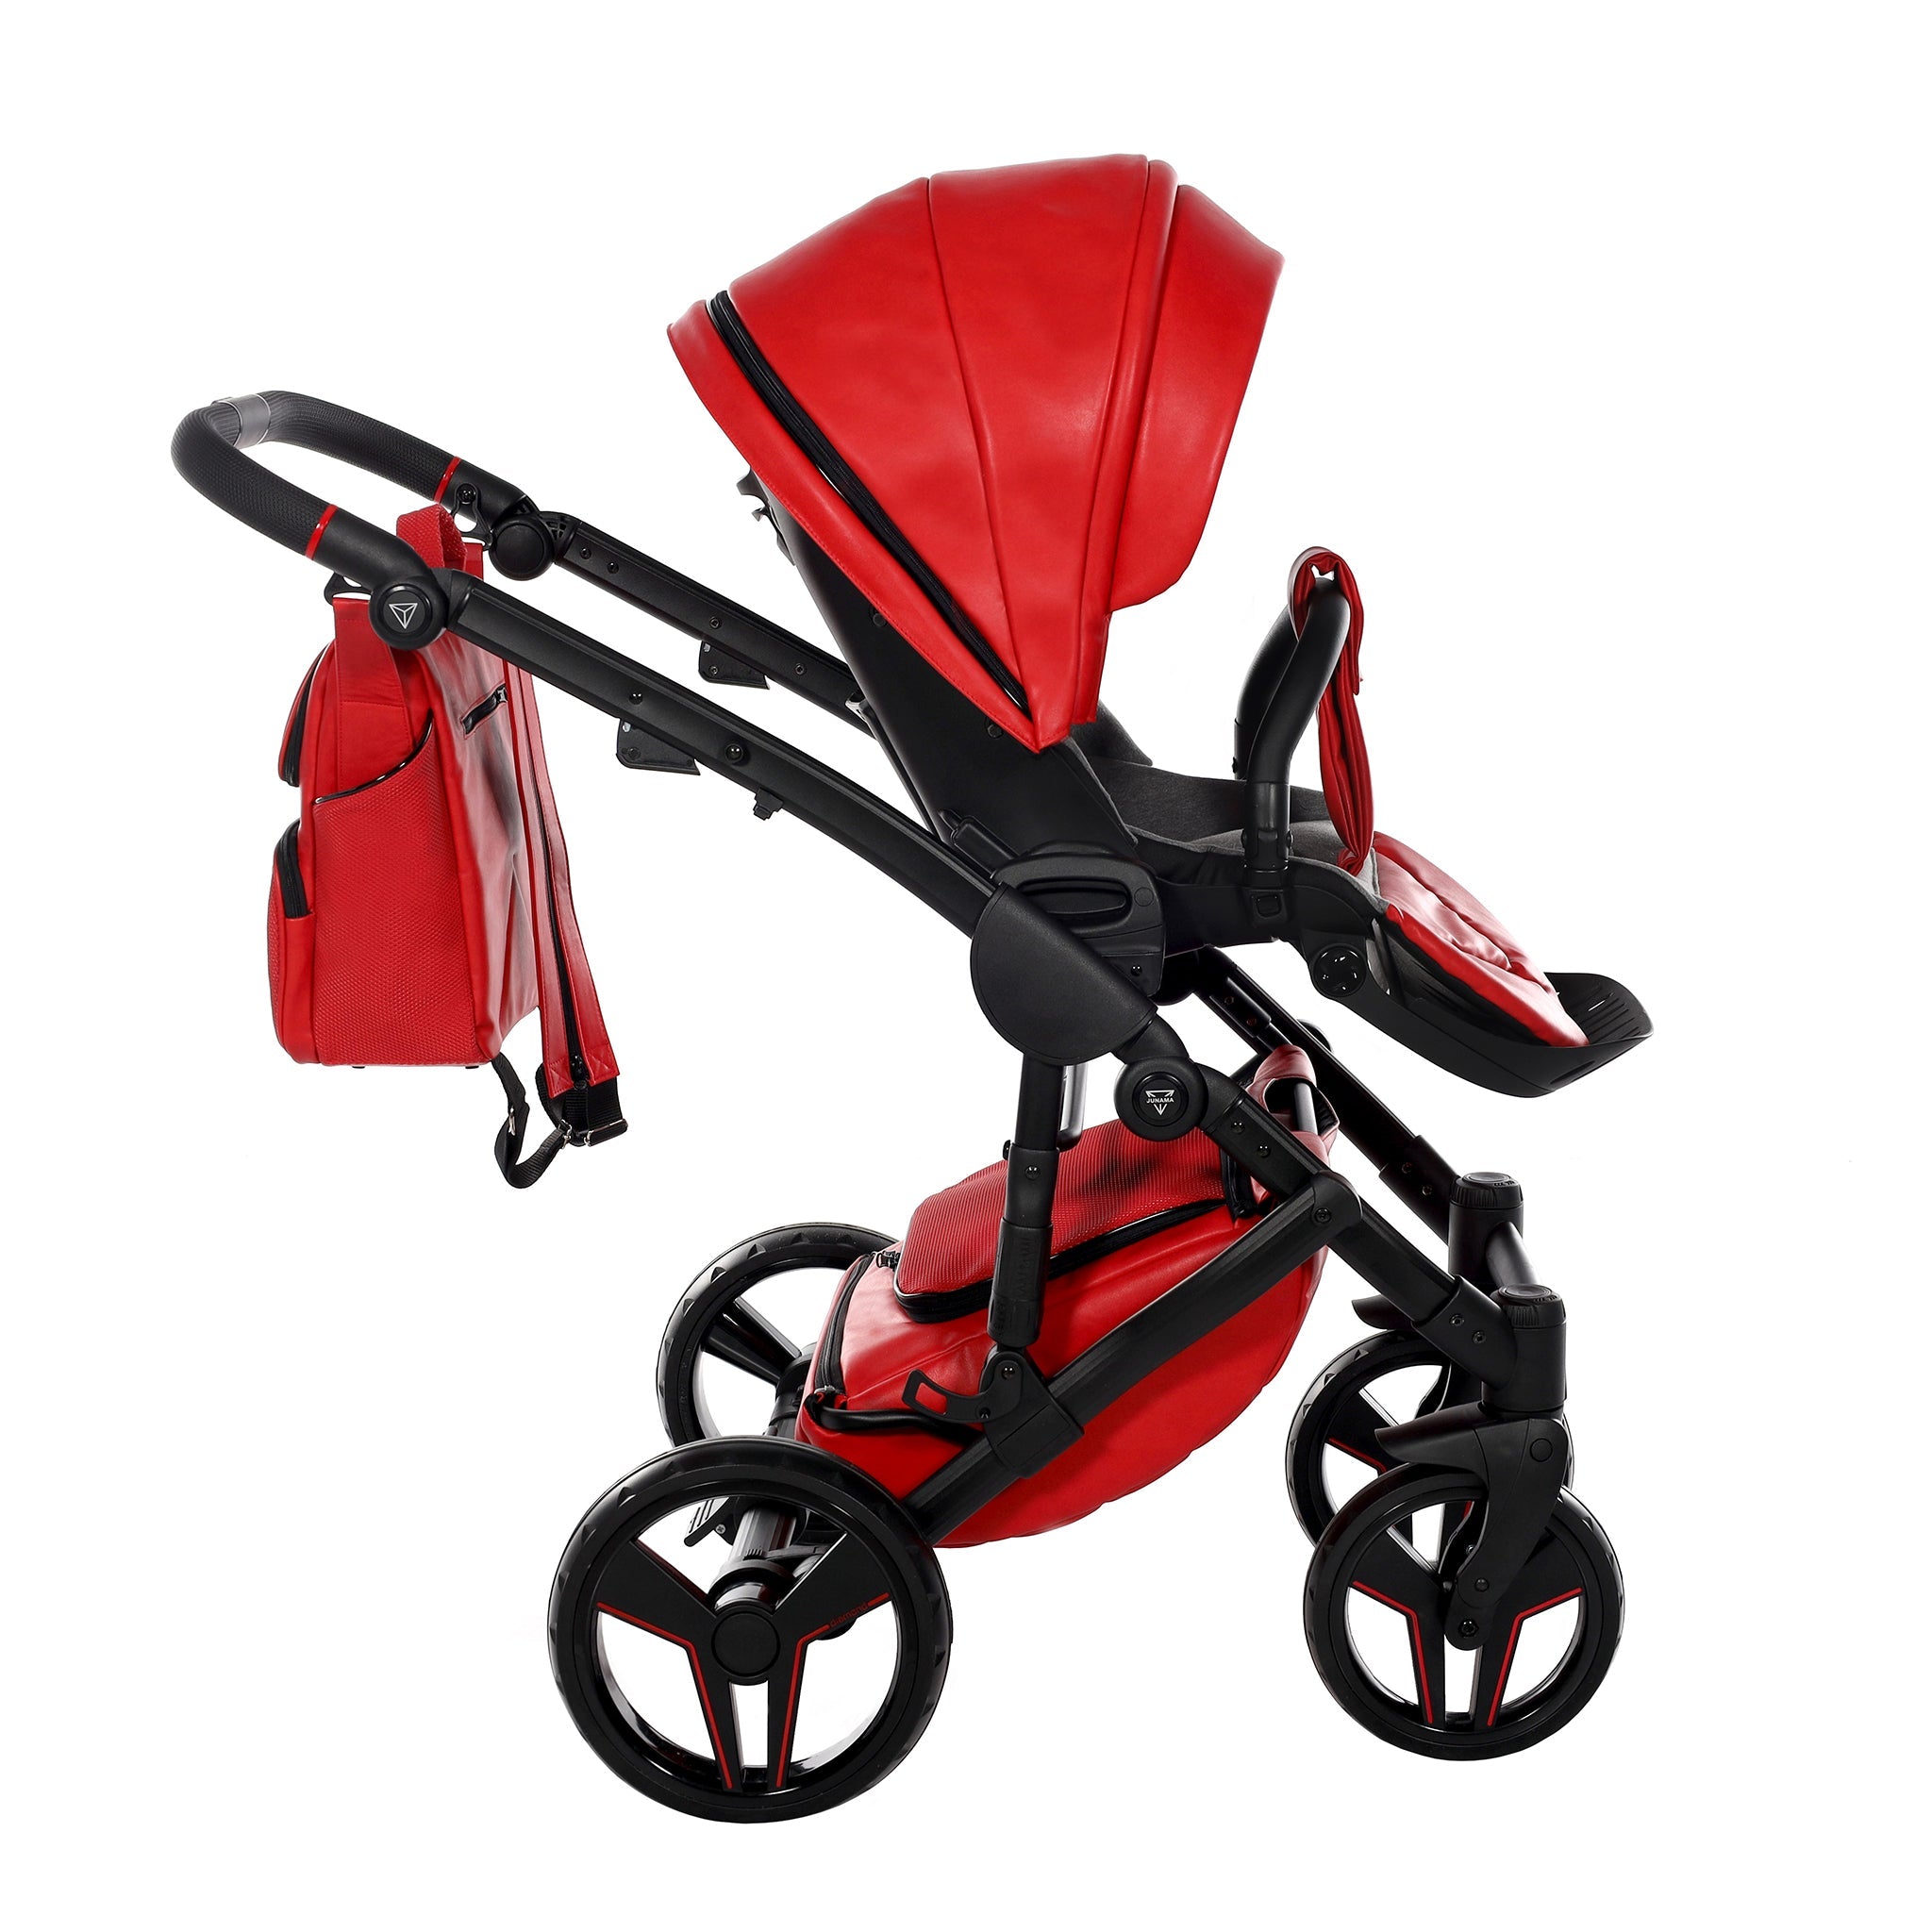 Junama S Class, baby prams or stroller 2 in 1 - Red and Black, Code number: JUNSC08